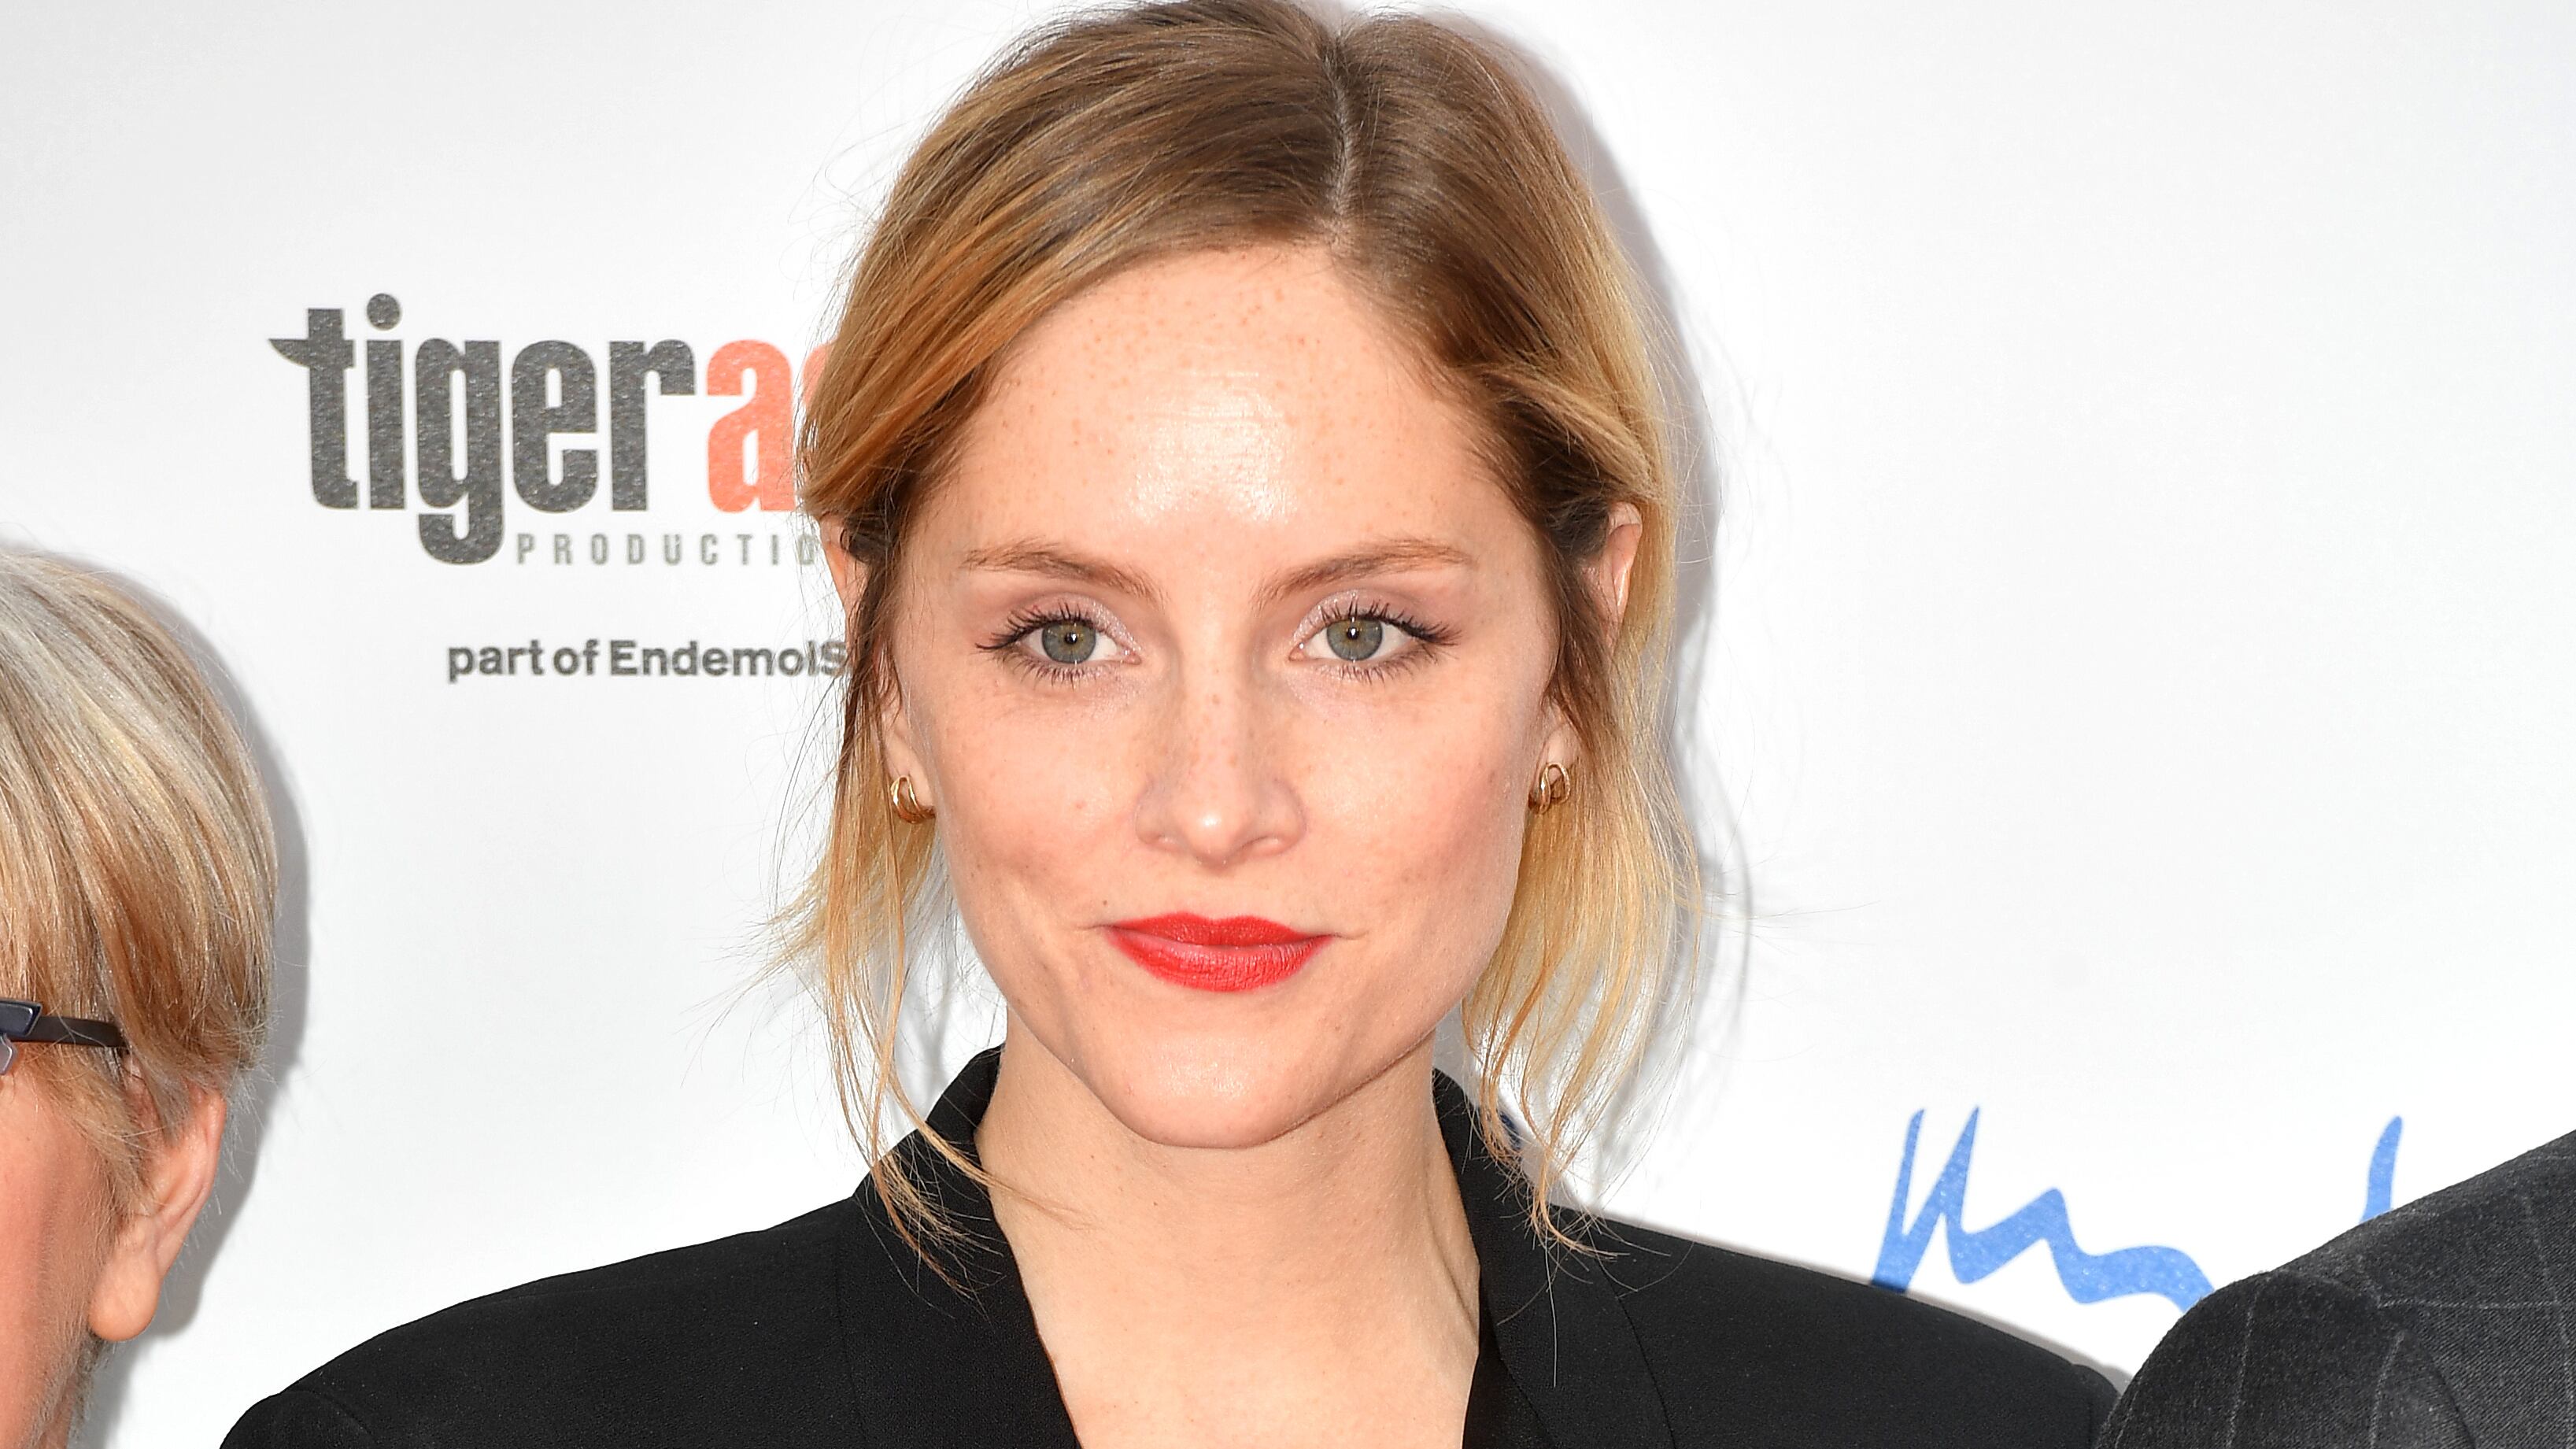 British actress Sophie Rundle is expecting baby number two